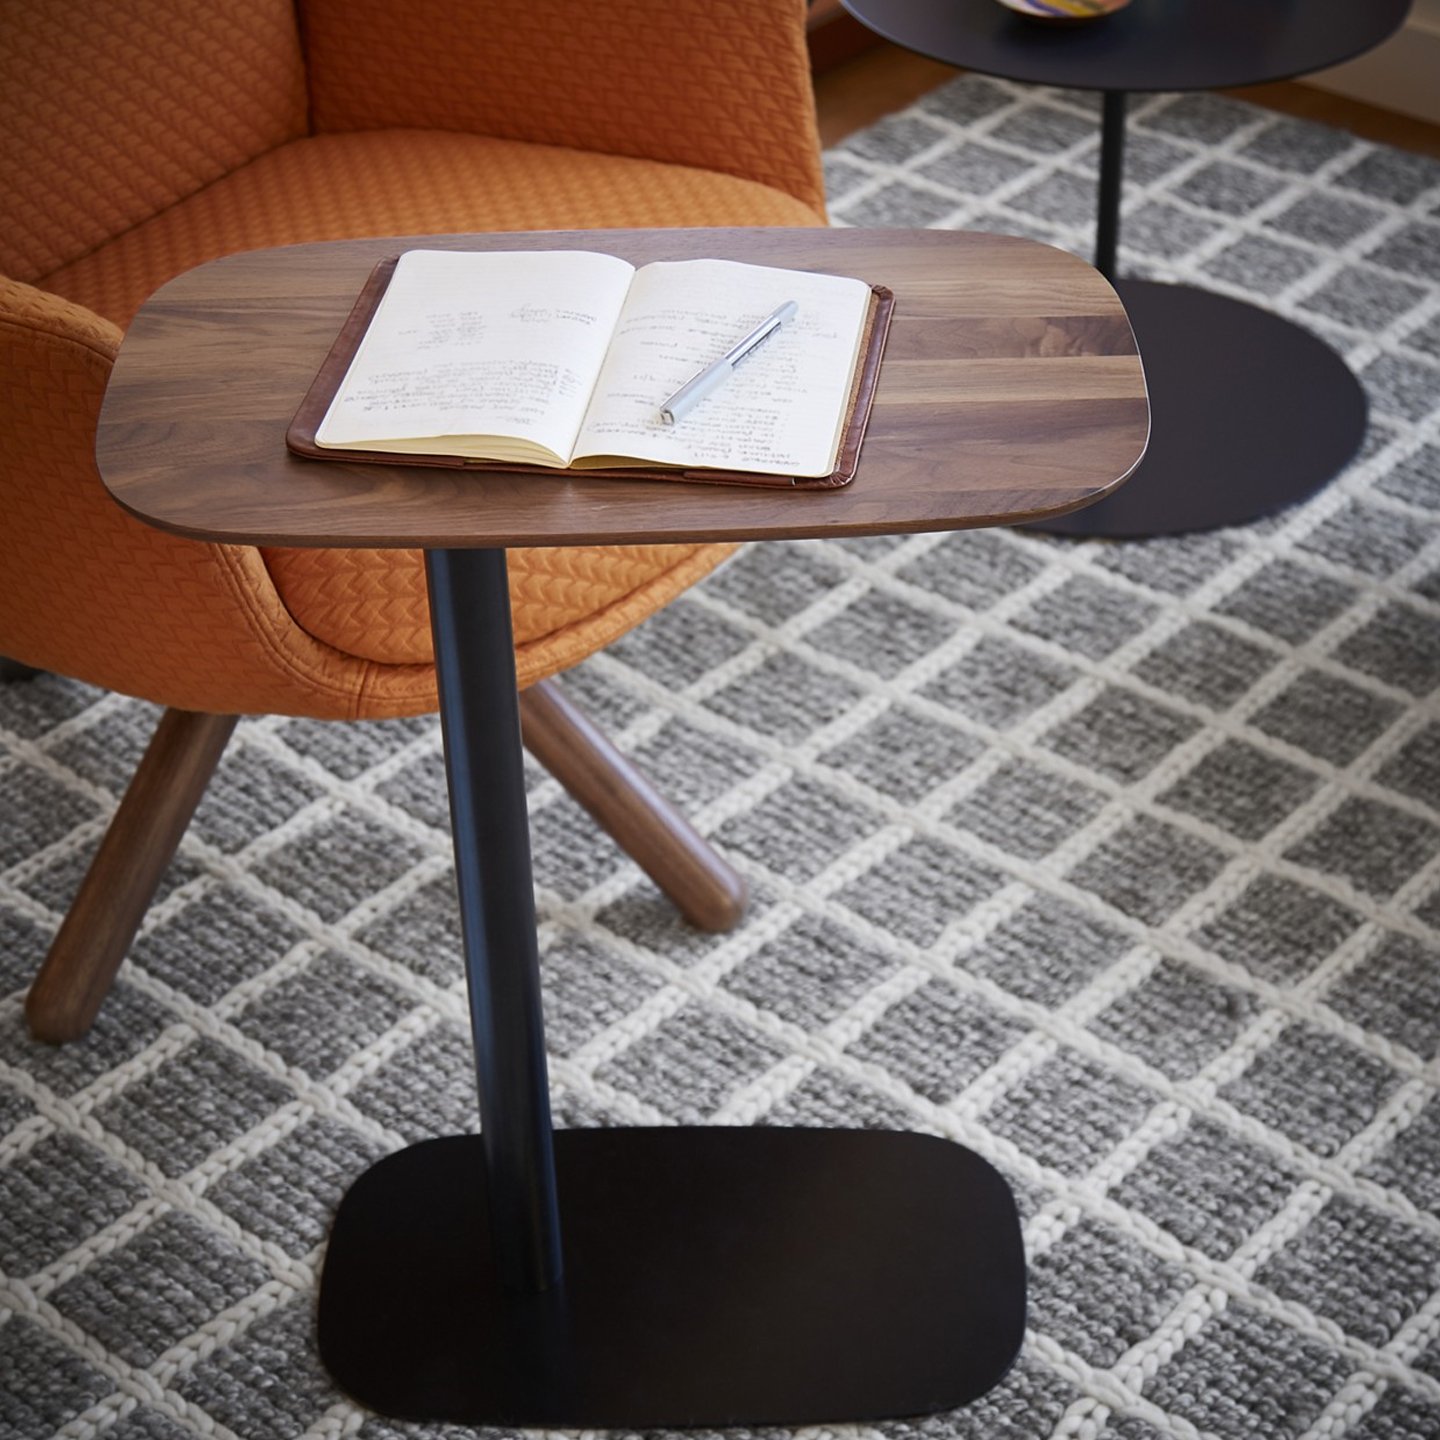 Haworth Pip Laptop table in walnut hardwood and a black steel base next to orange chair and notebook on it